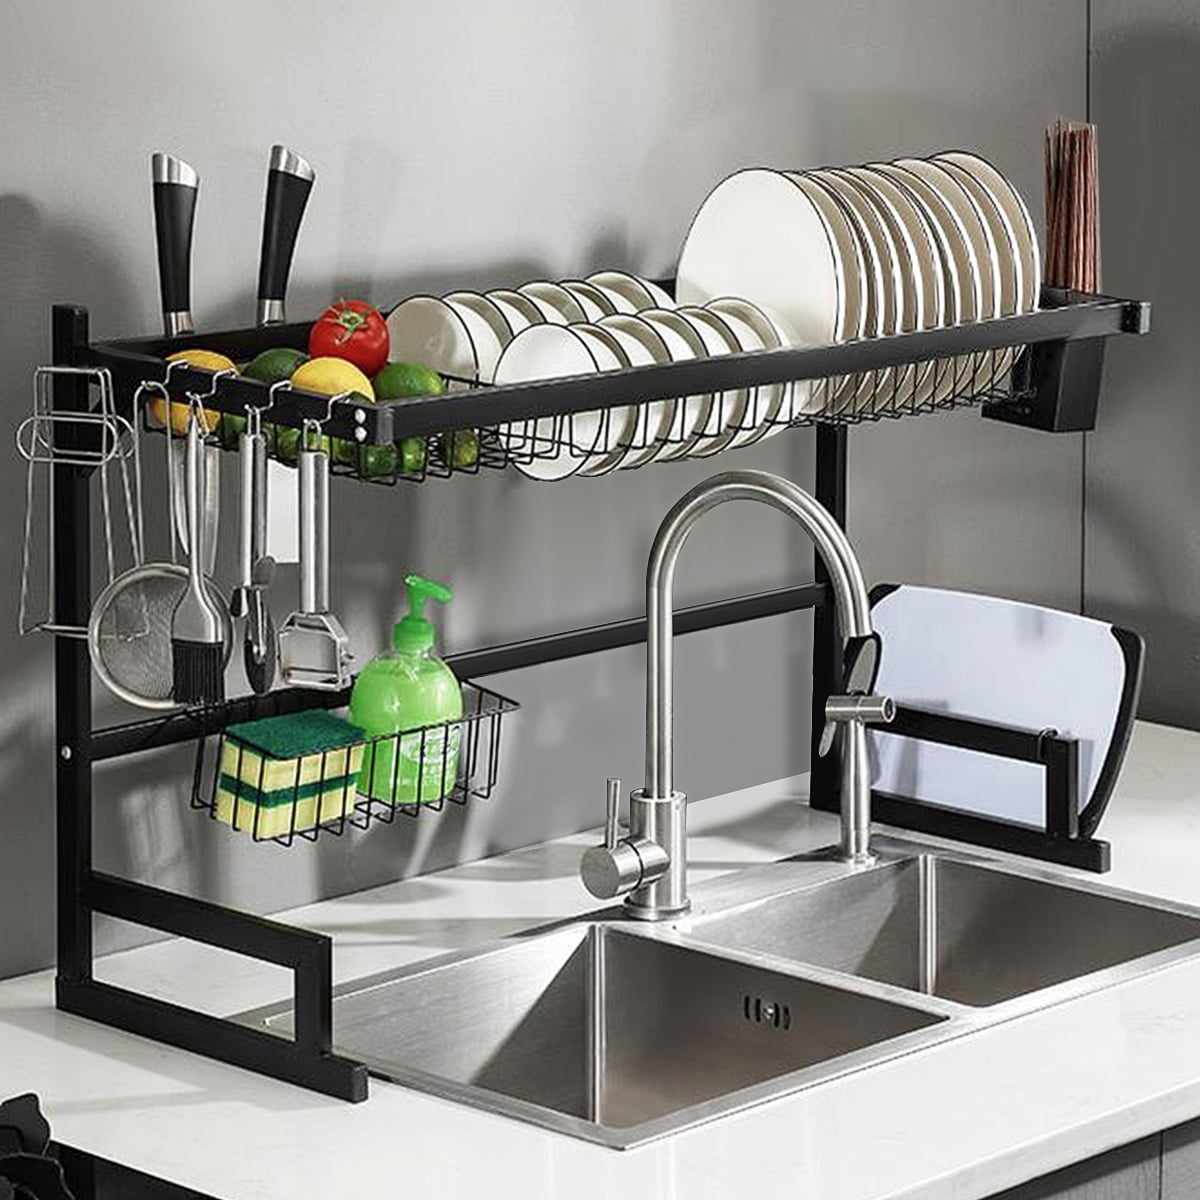 Stainless Steel 2 Tier Dish Drying Rack - Over Sink, Drainer Shelf 2 Tier Stainless Steel Dish Rack